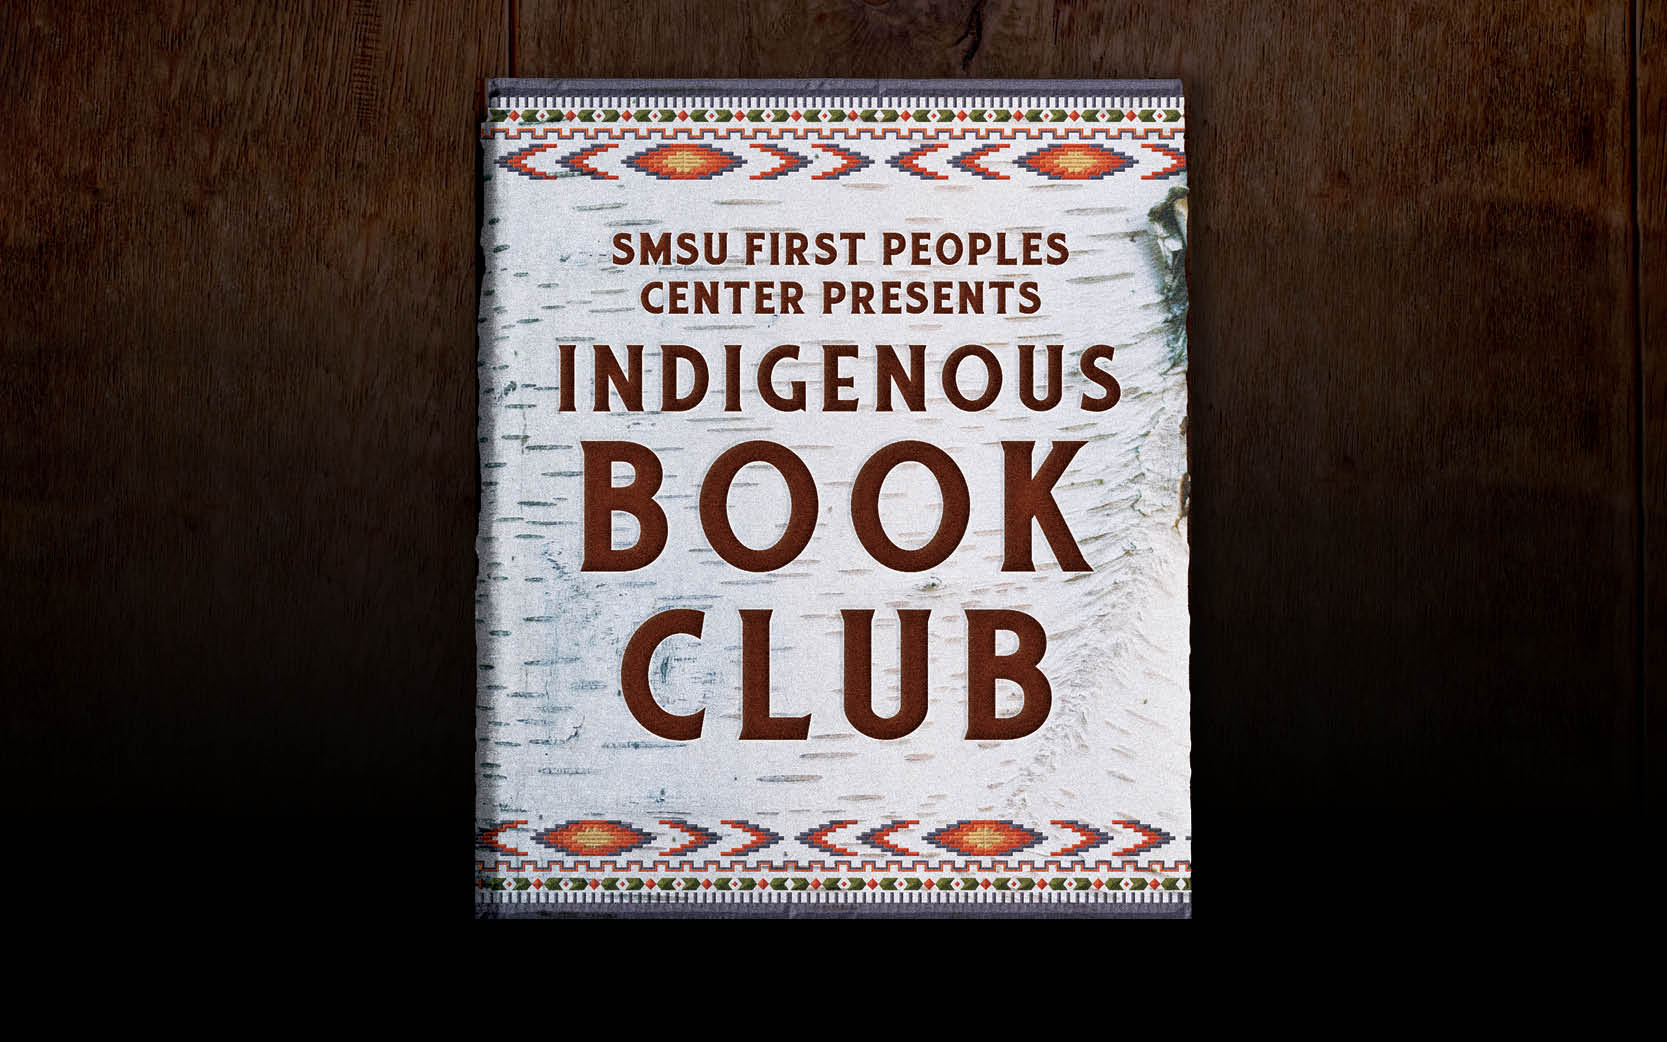 SMSU First Peoples Center presents Indigenous Book Club